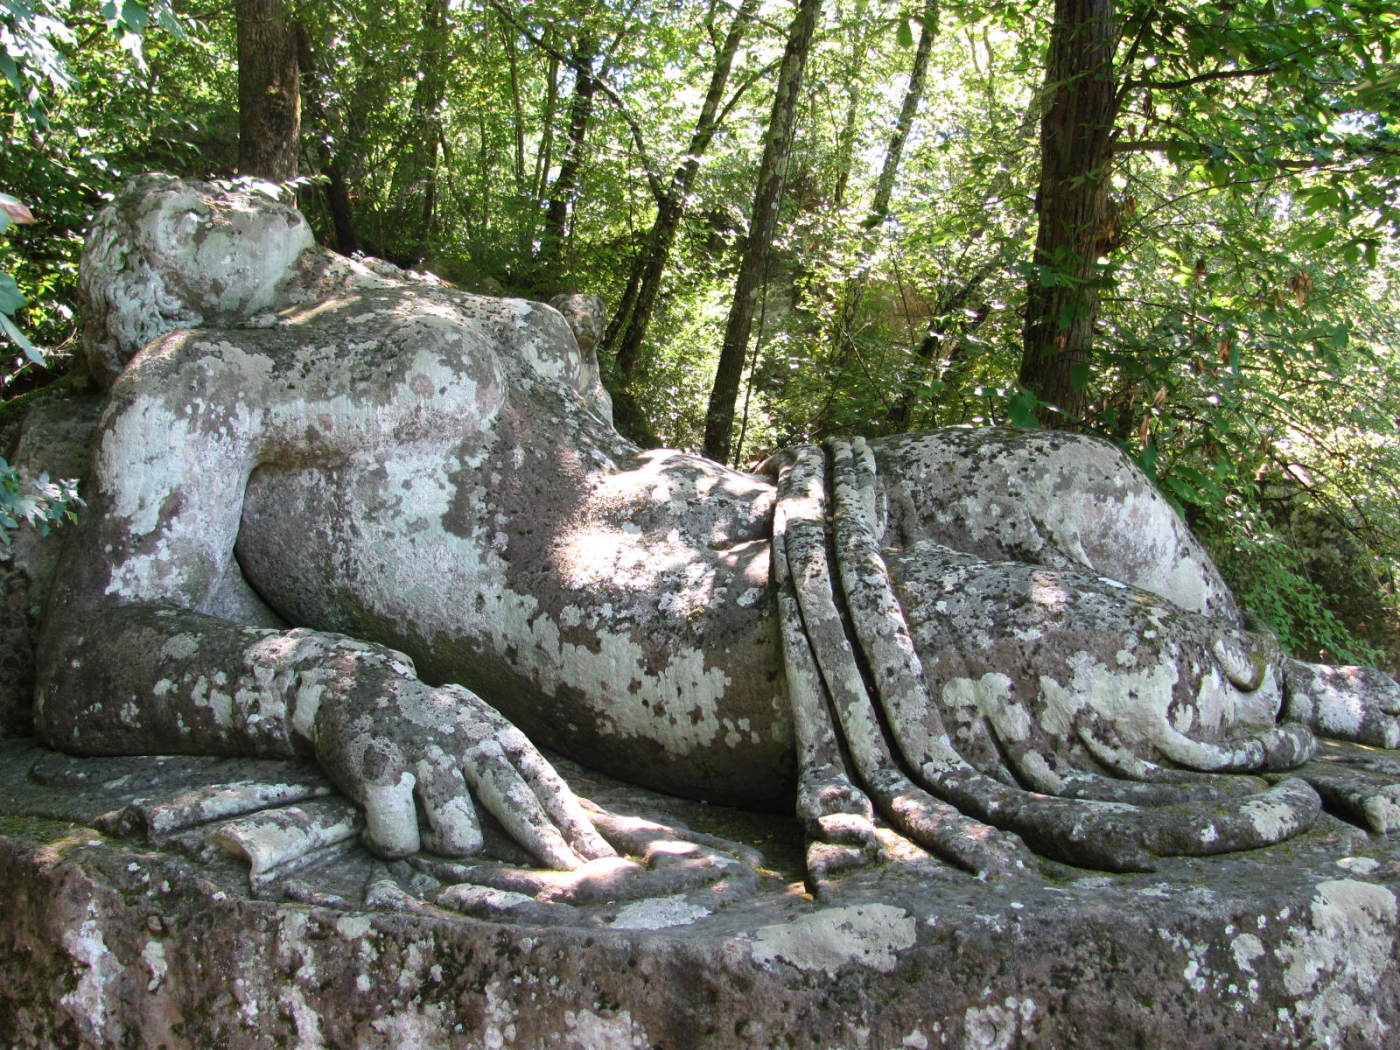 Garden of the Monsters, Bomarzo